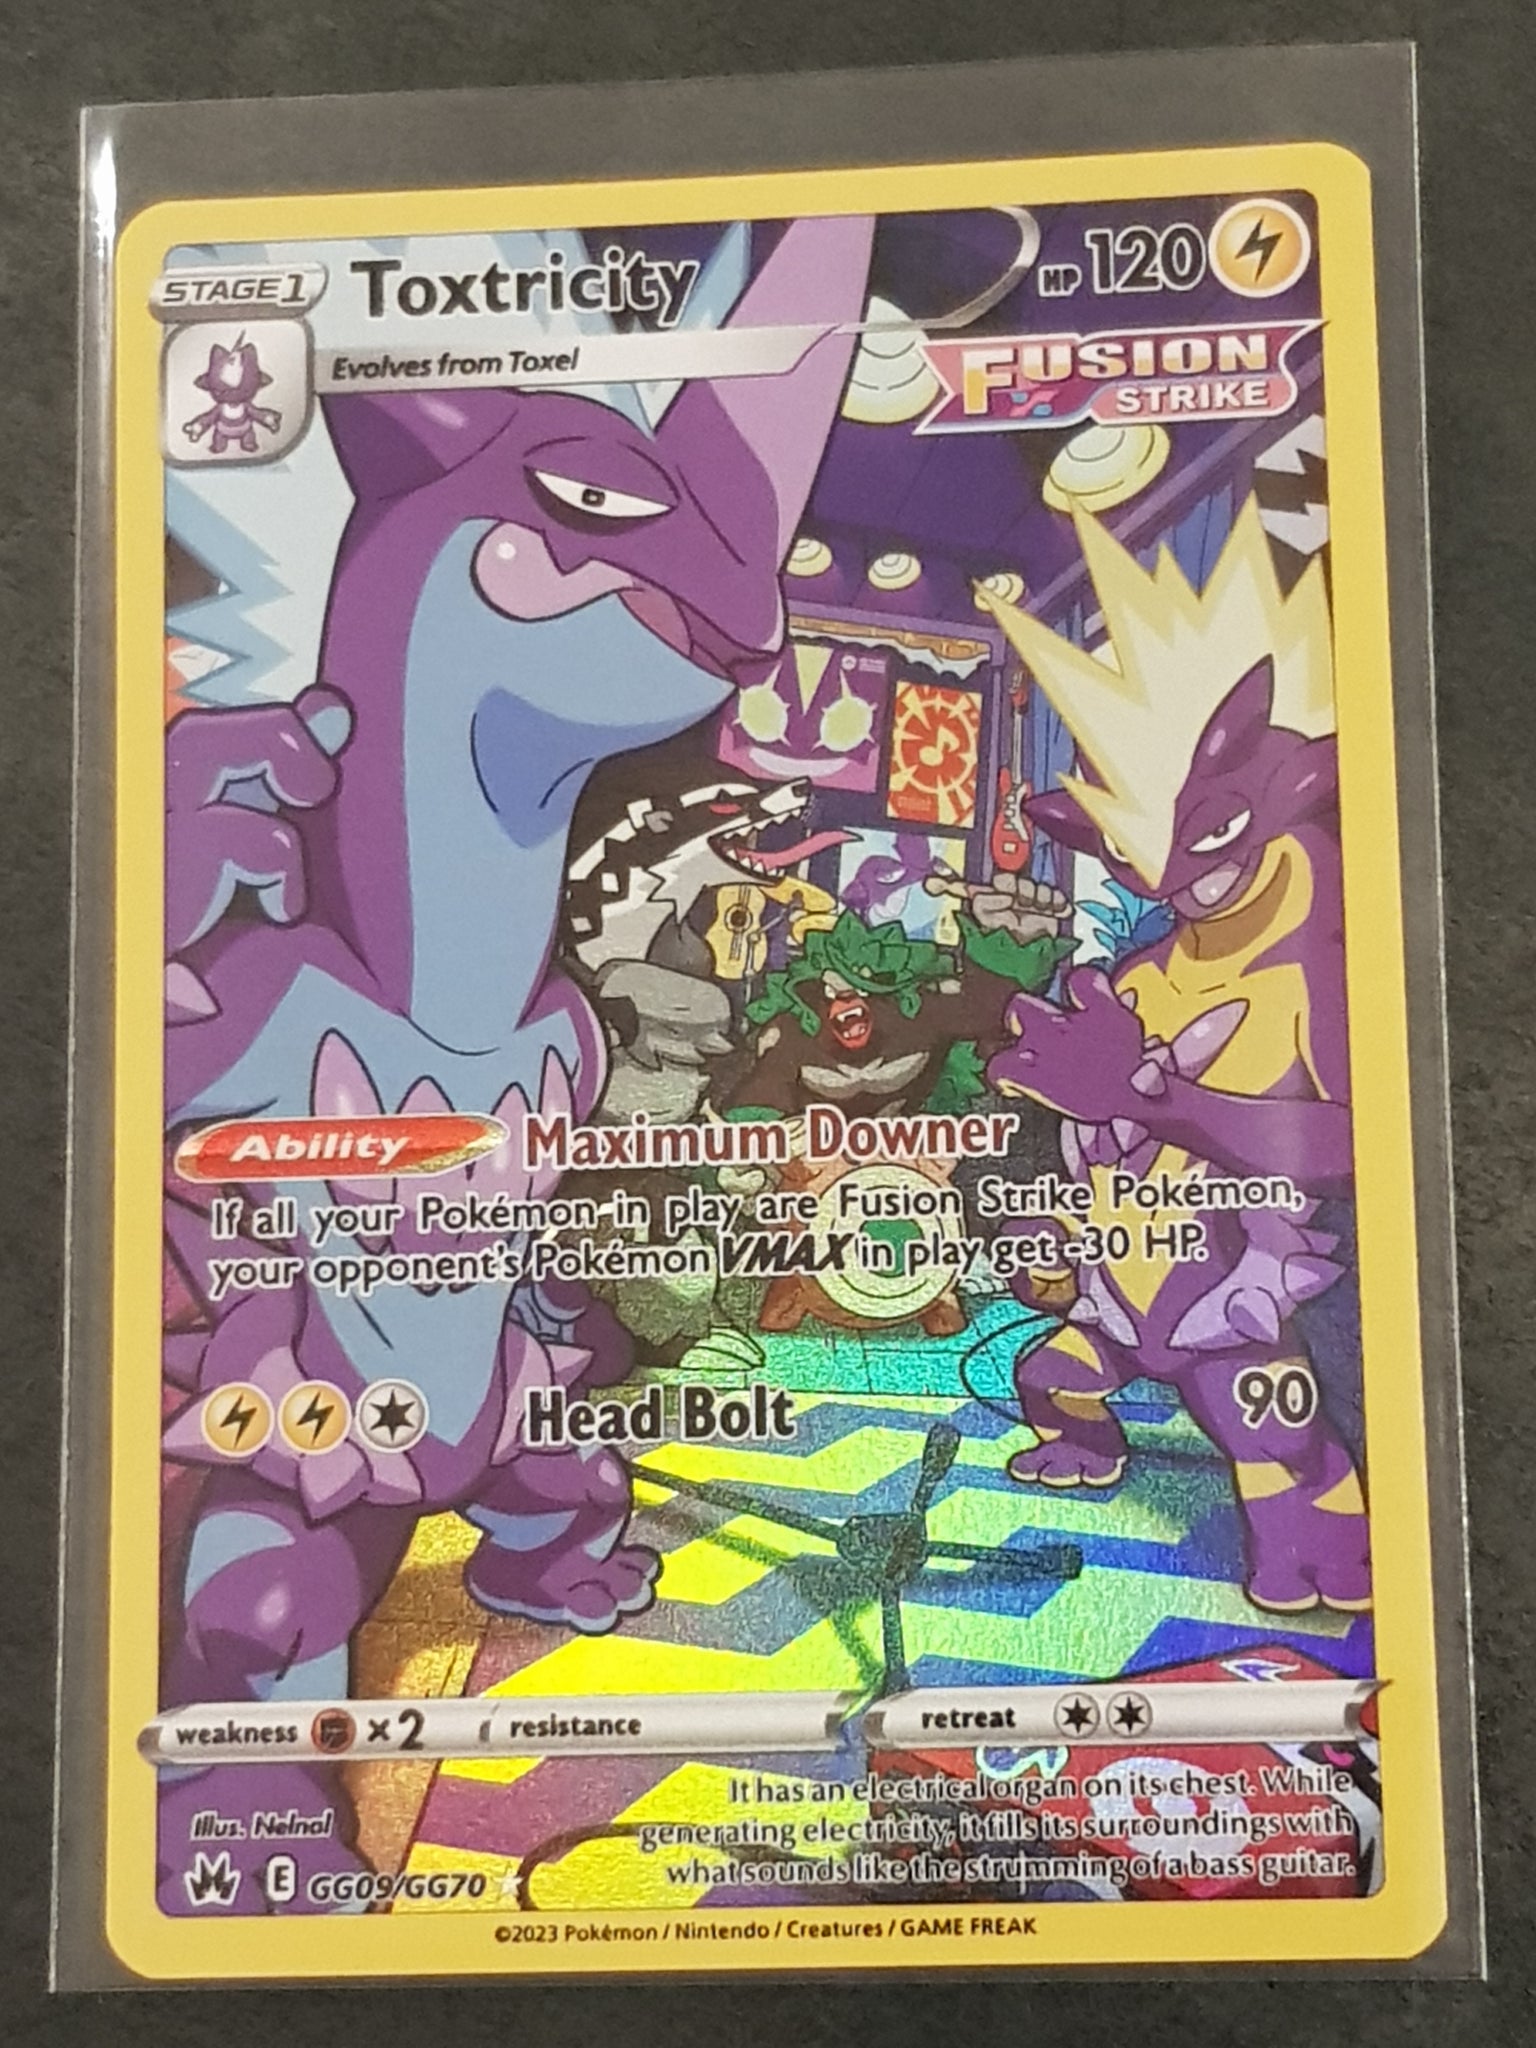 Pokemon Sword and Shield Crown Zenith Toxtricity #GG09/GG70 Holo Trading Card